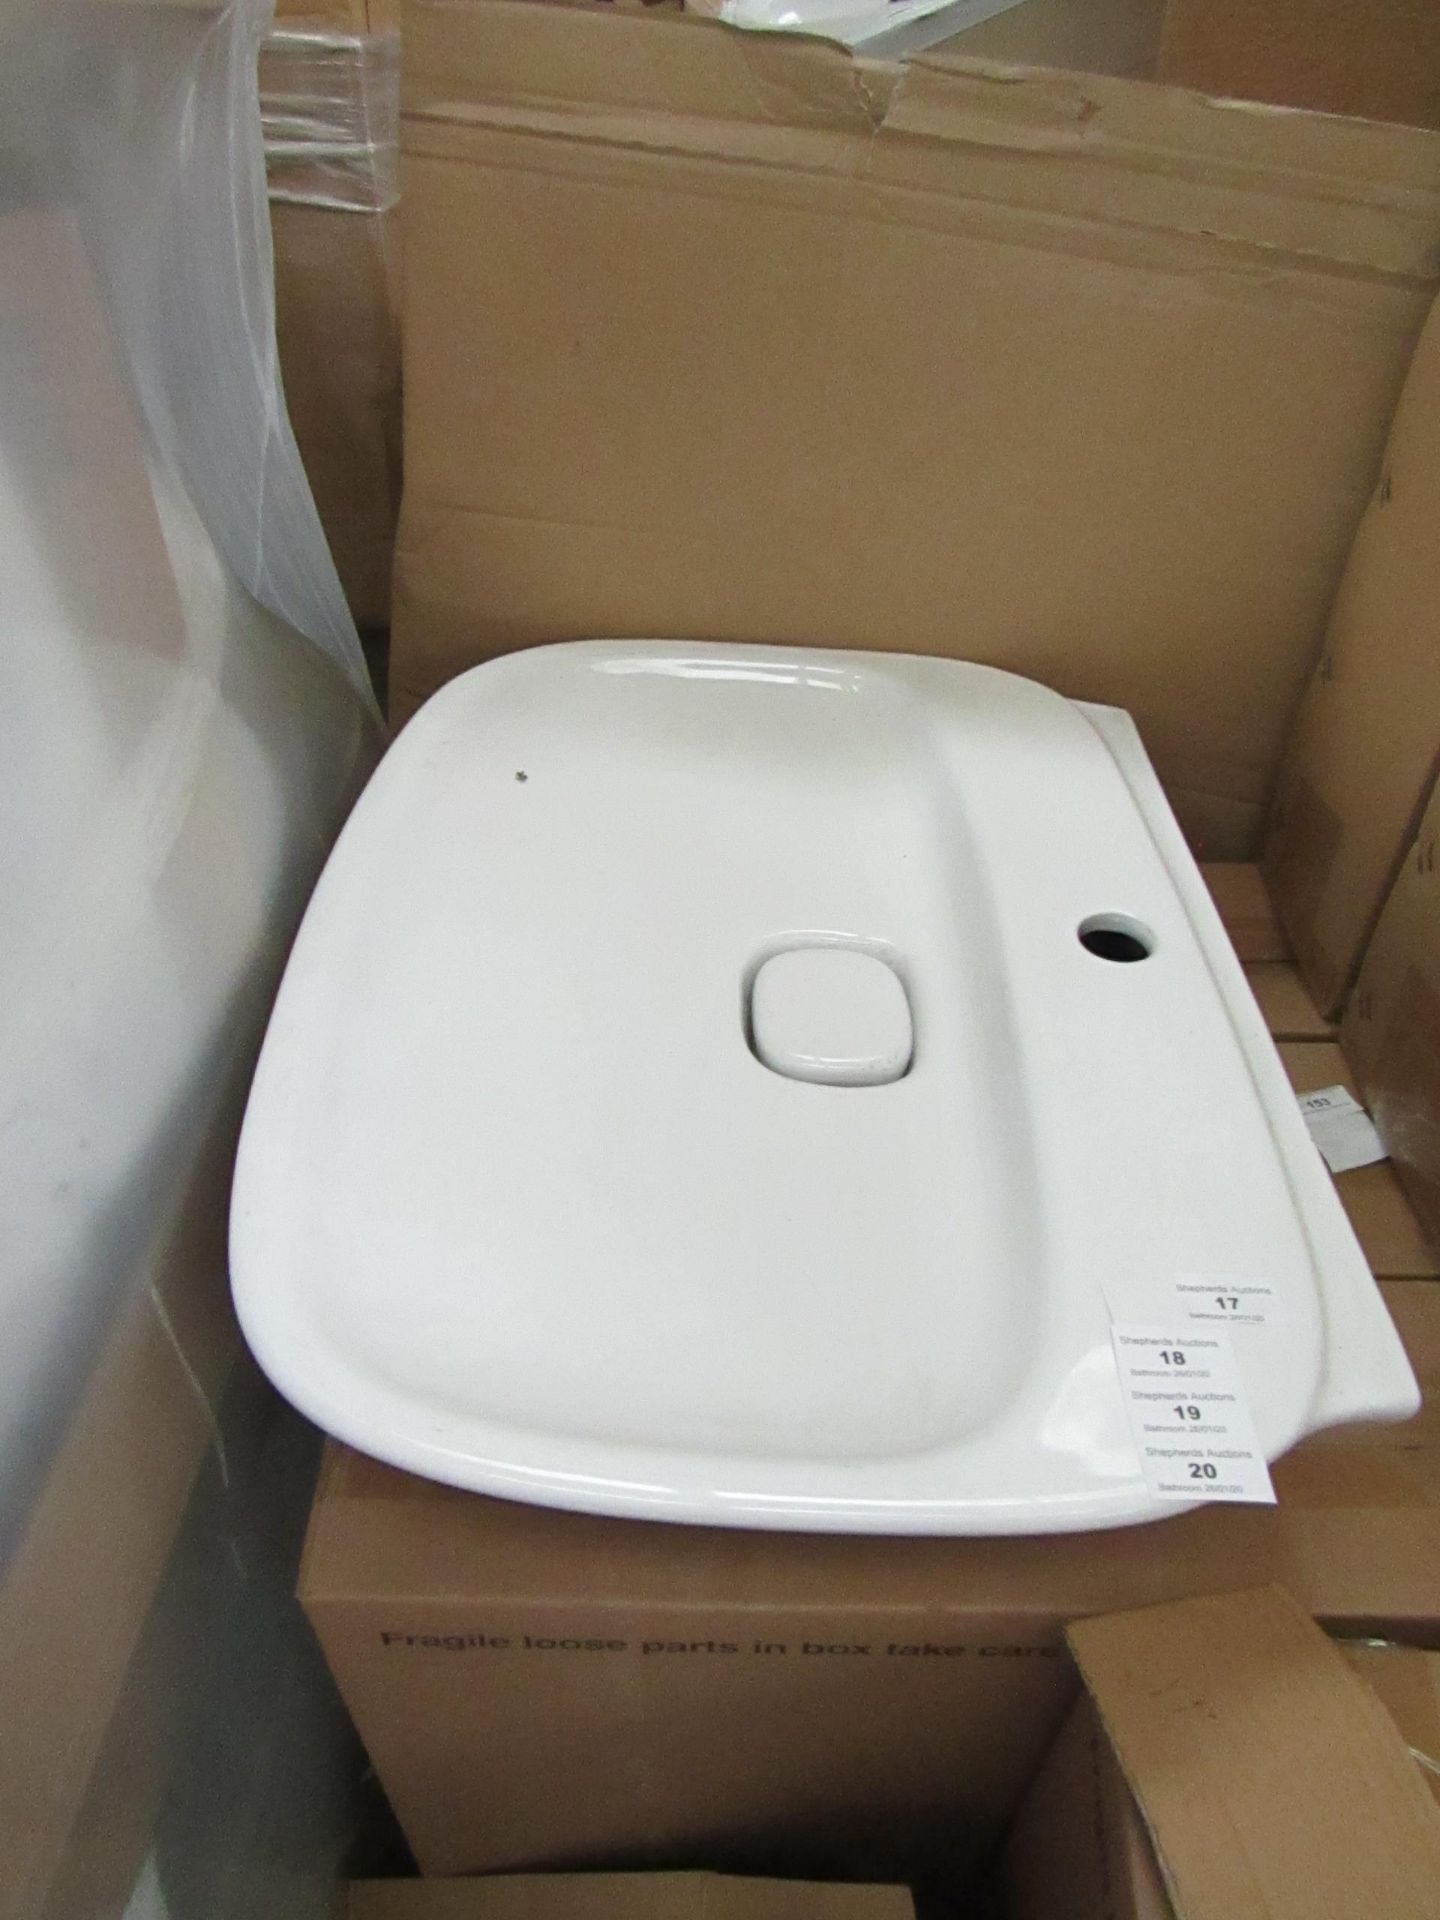 Laufen 600mm 1TH basin with ceramic cover, new and boxed.